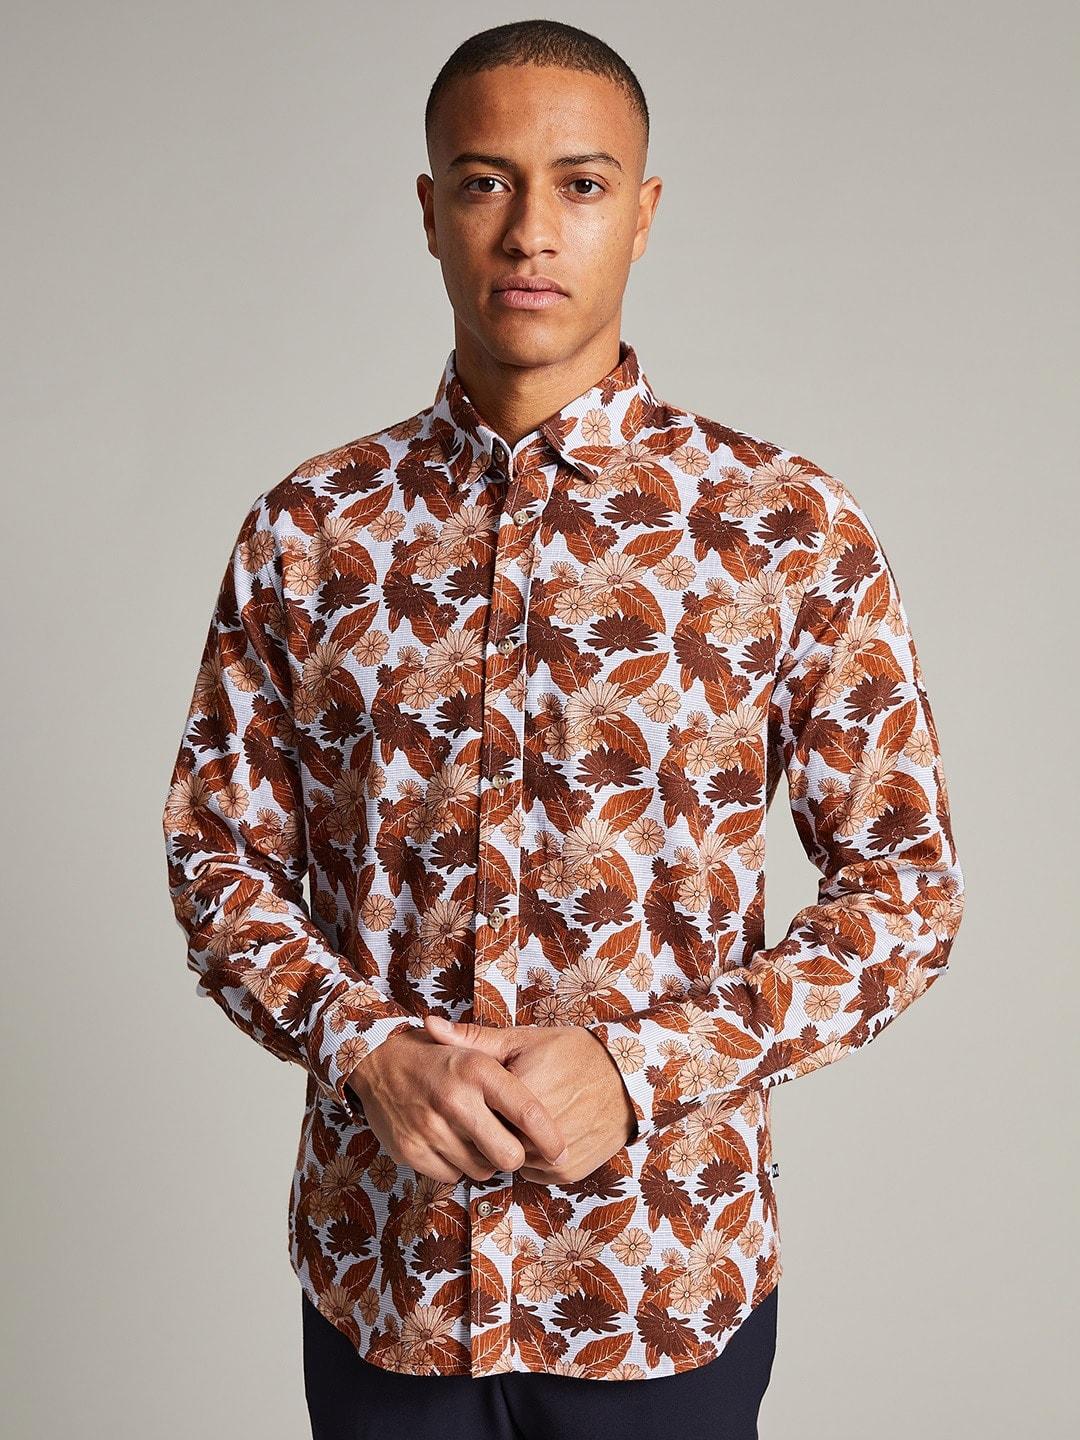 matinique-men-brown-floral-printed-casual-shirt